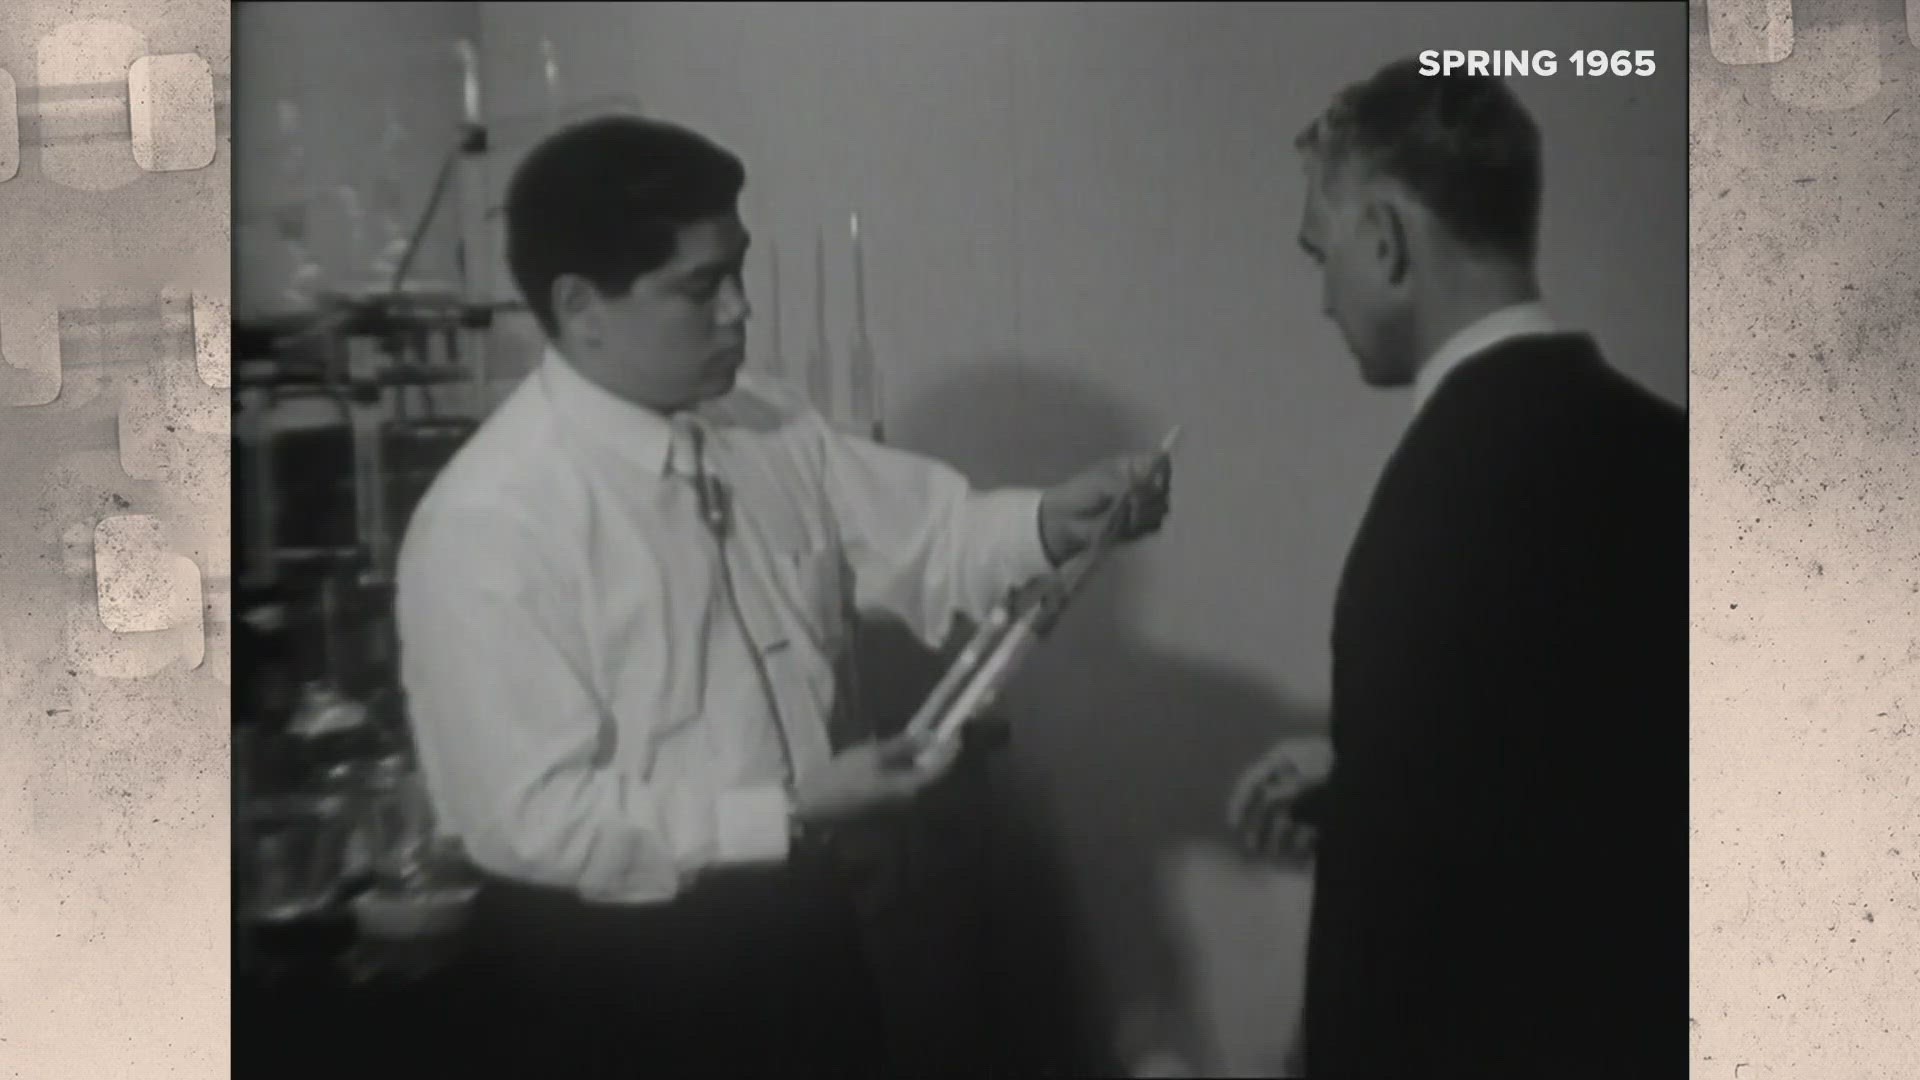 Breathalyzer tests have come a long way since they were first invented.
In the spring of 1965 when St. Louis police demonstrated an early version